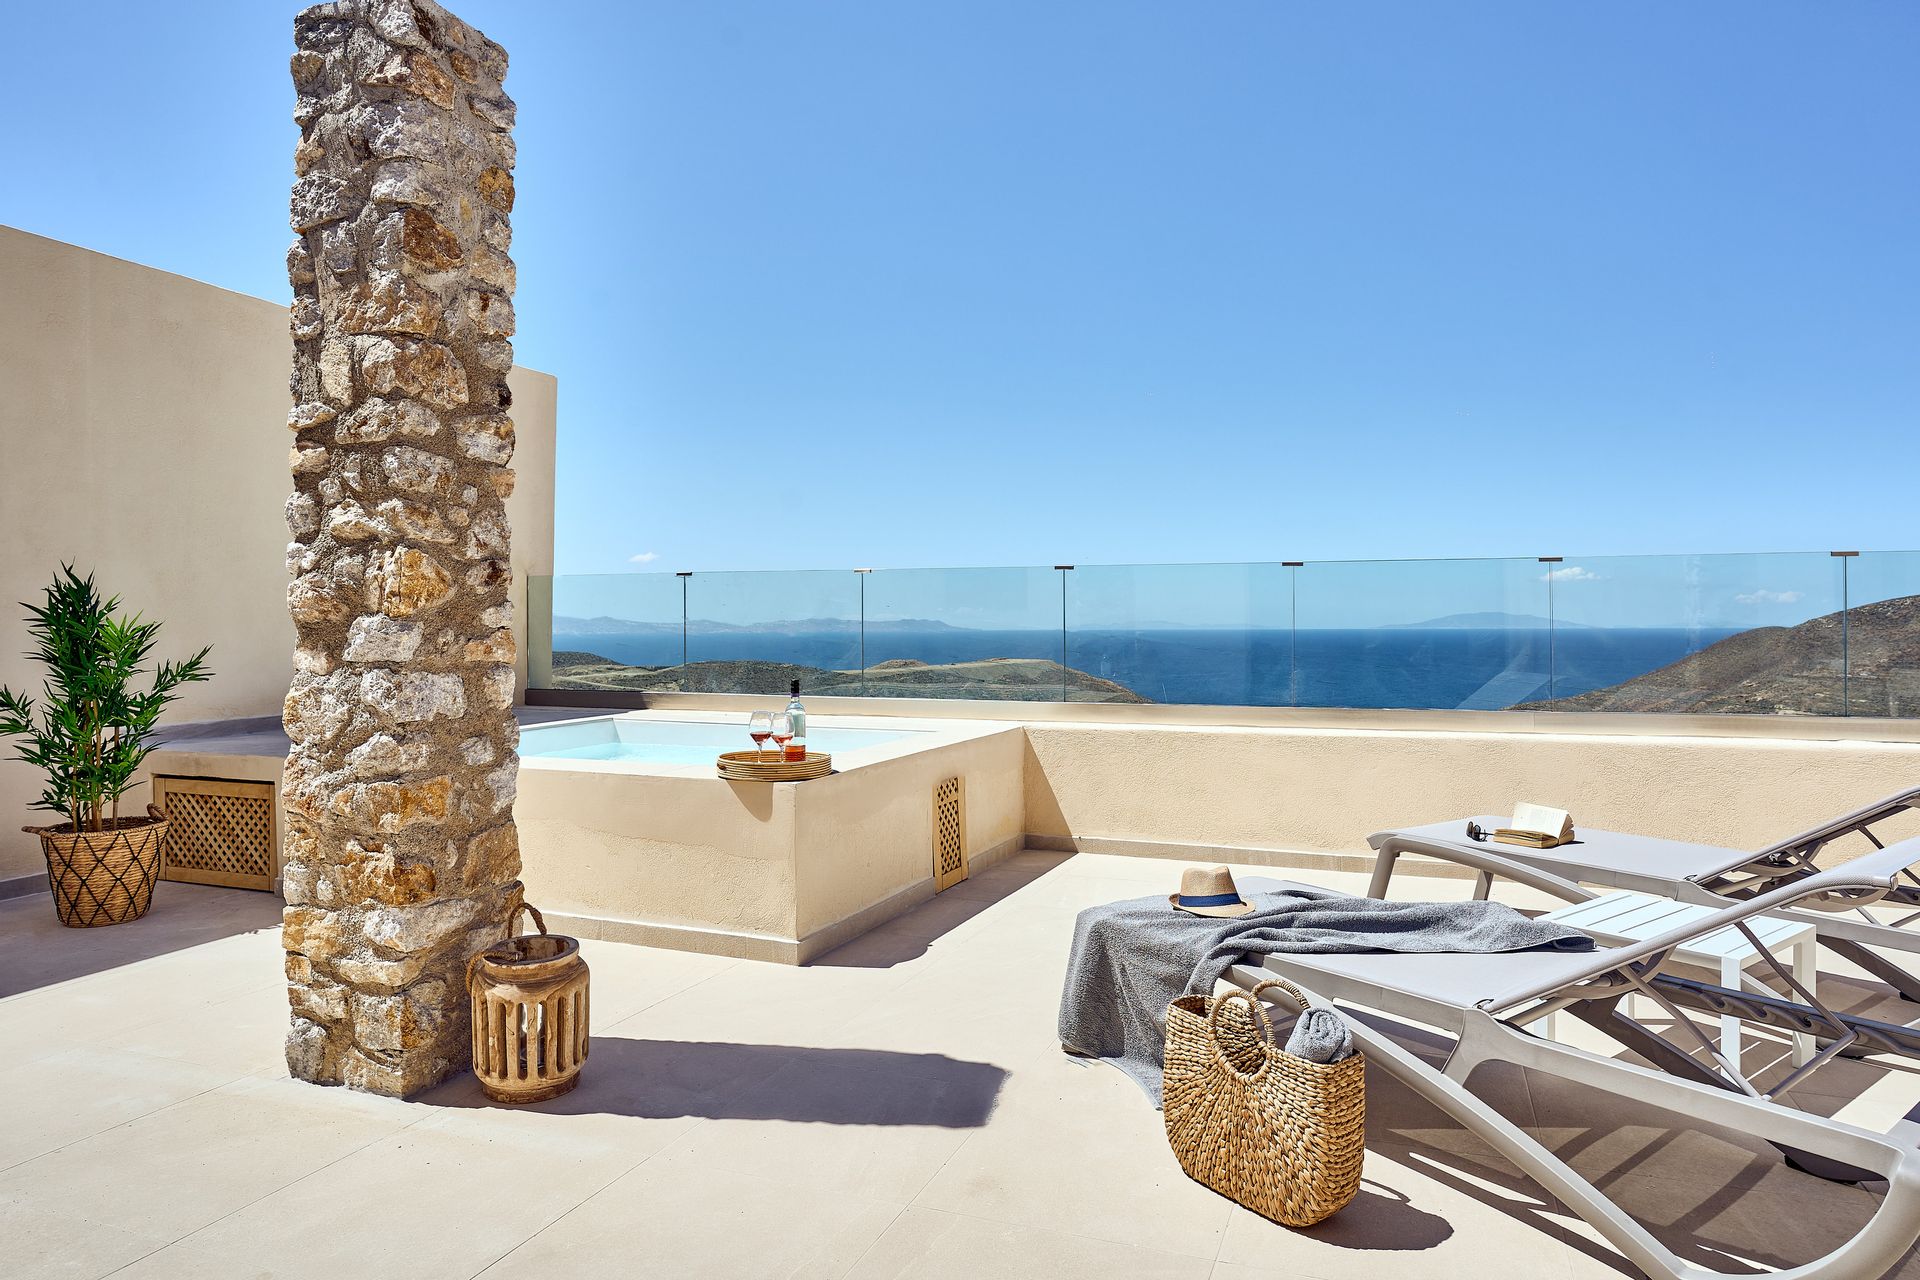 Casa di Namphio Villa &amp; Suites - Ανάφη ✦ 2 Ημέρες (1 Διανυκτέρευση) ✦ 2 άτομα ✦ Πρωινό ✦ 09/06/2022 έως 30/09/2022 ✦ Welcome drink!